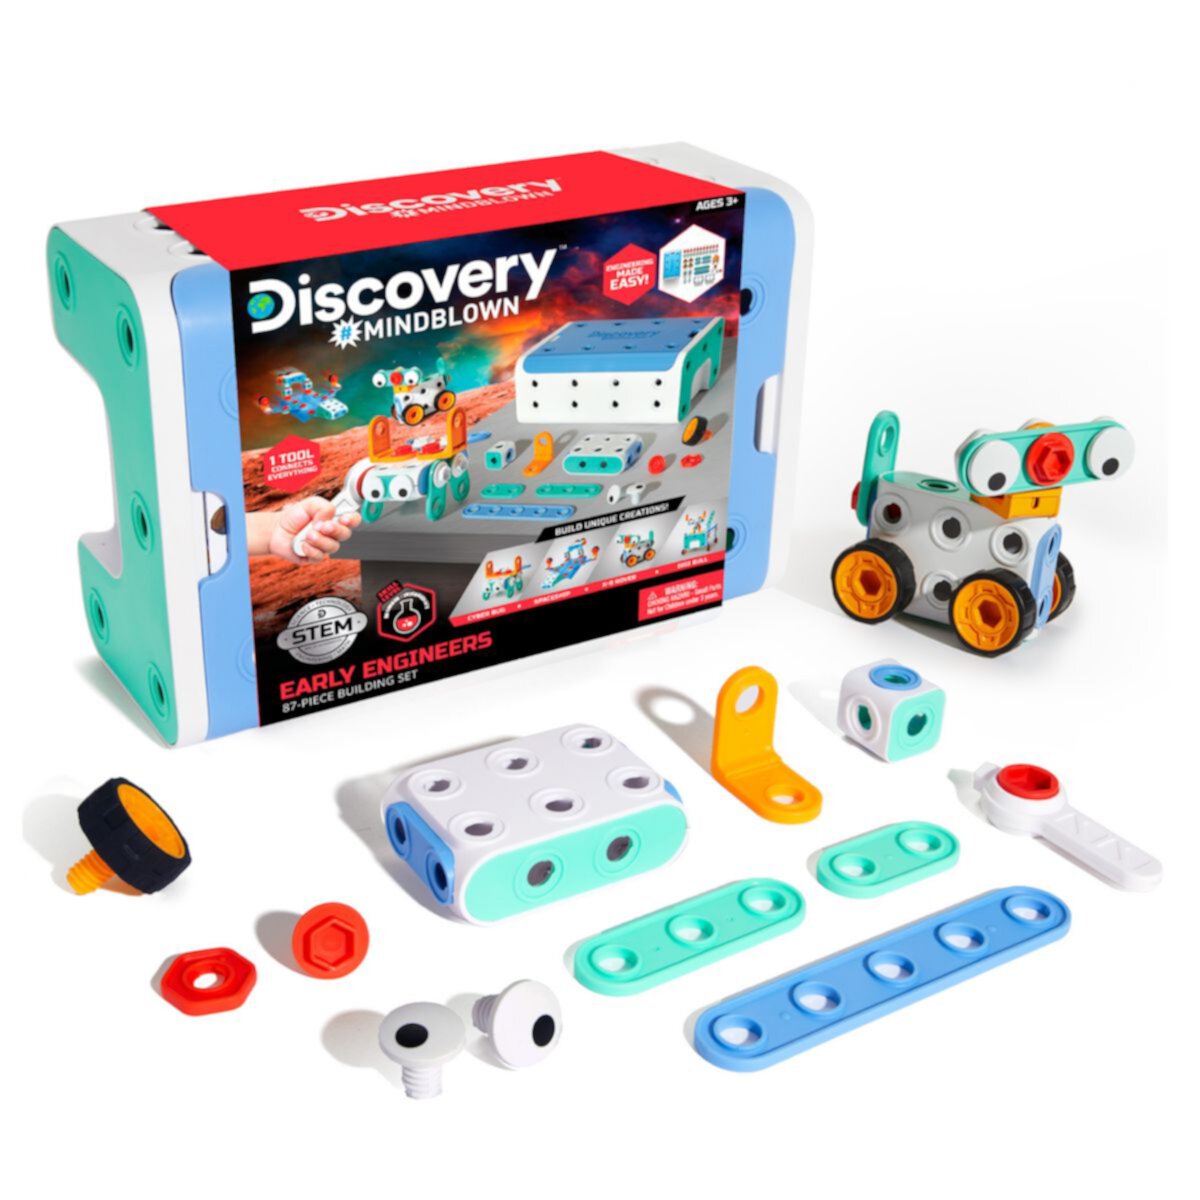 Discovery Mindblown 88-Piece STEM Toy Early Engineers Building Set Discovery Mindblown